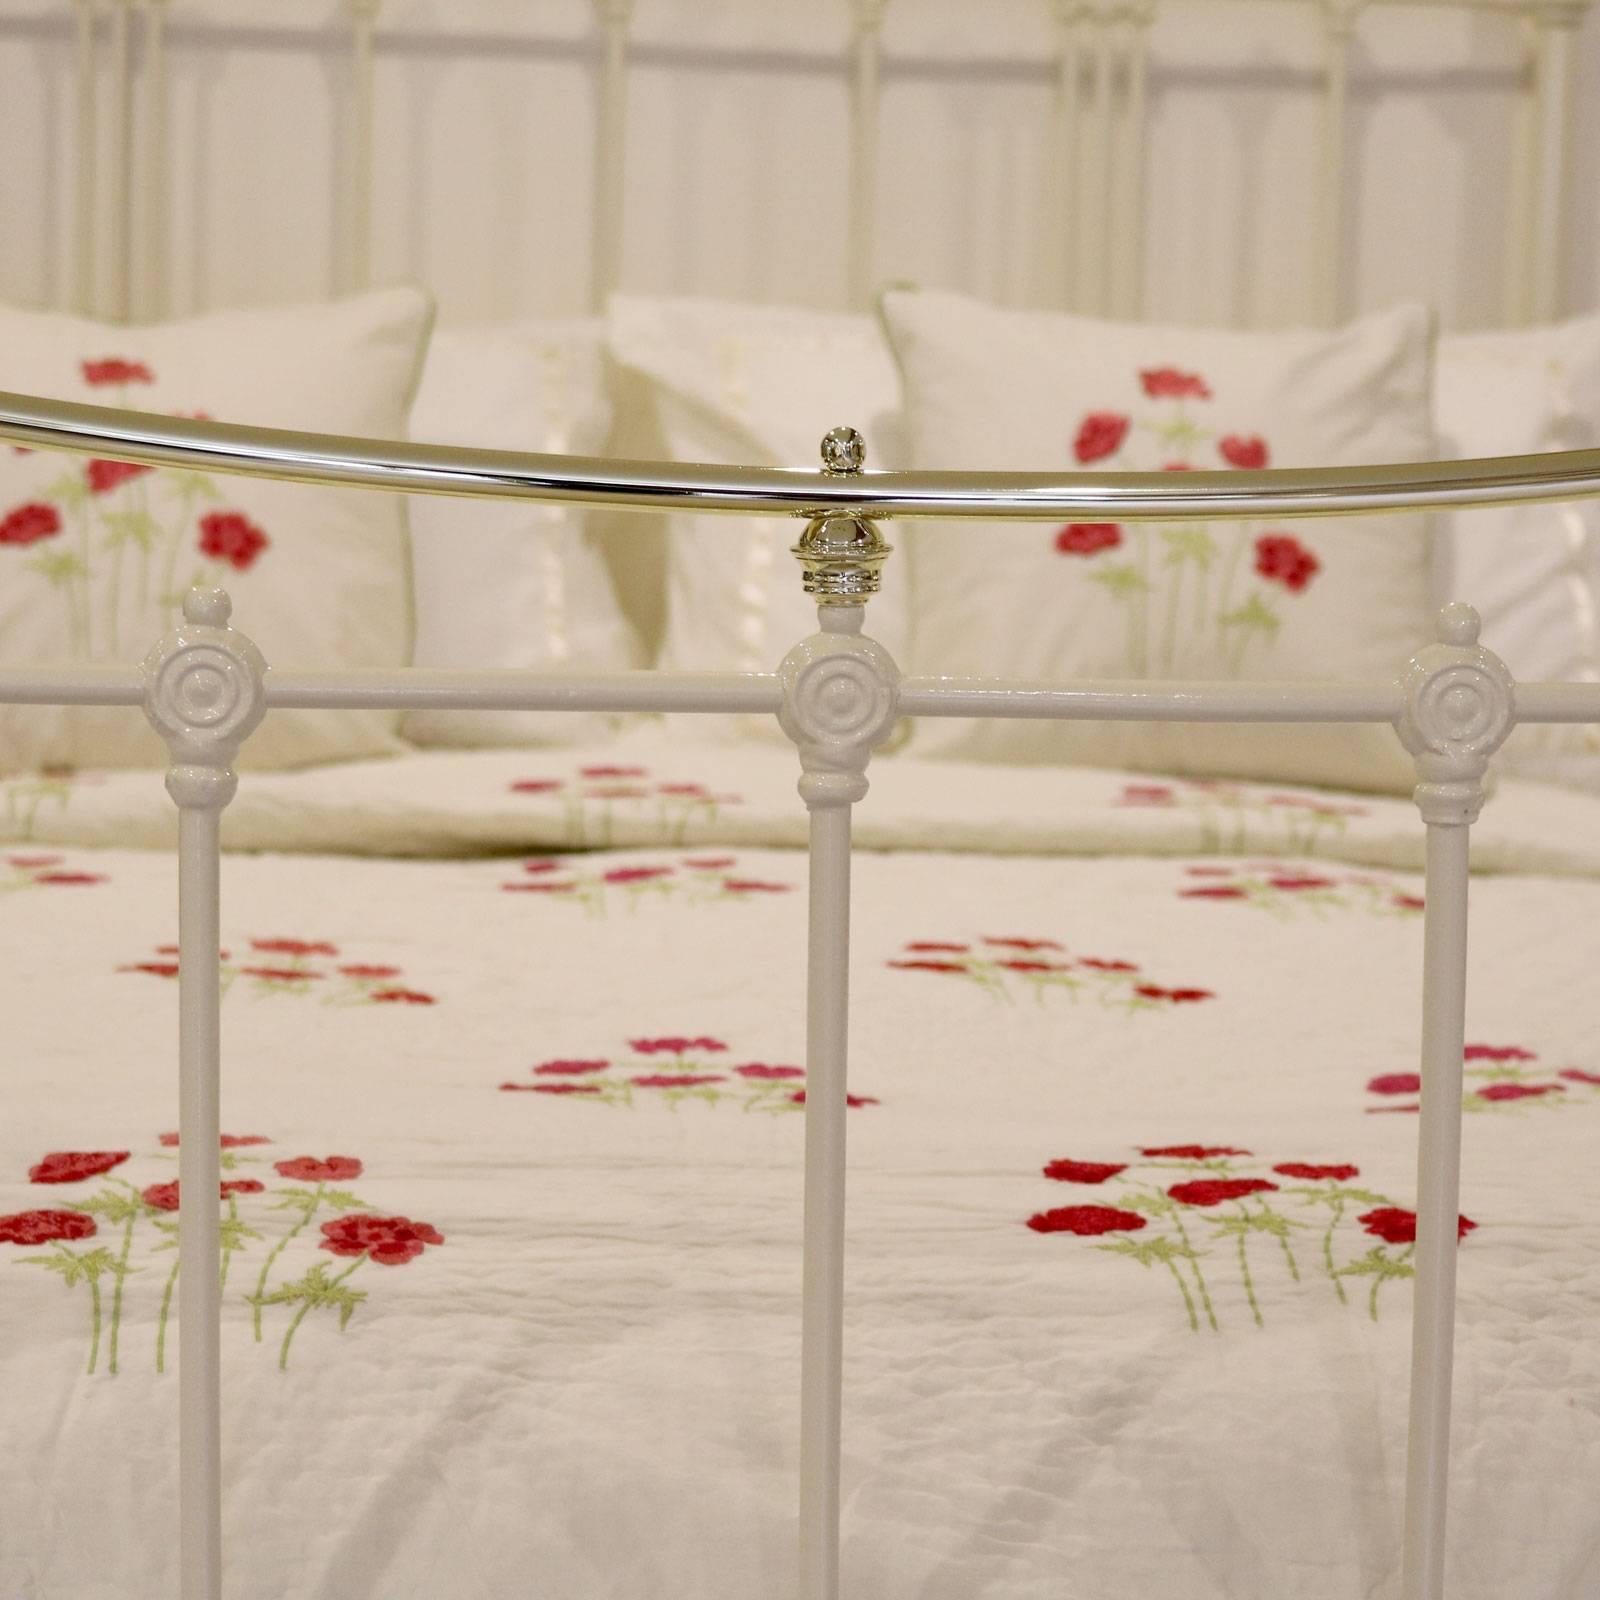 Early 20th Century Art Nouveau Style Brass and Iron Bed